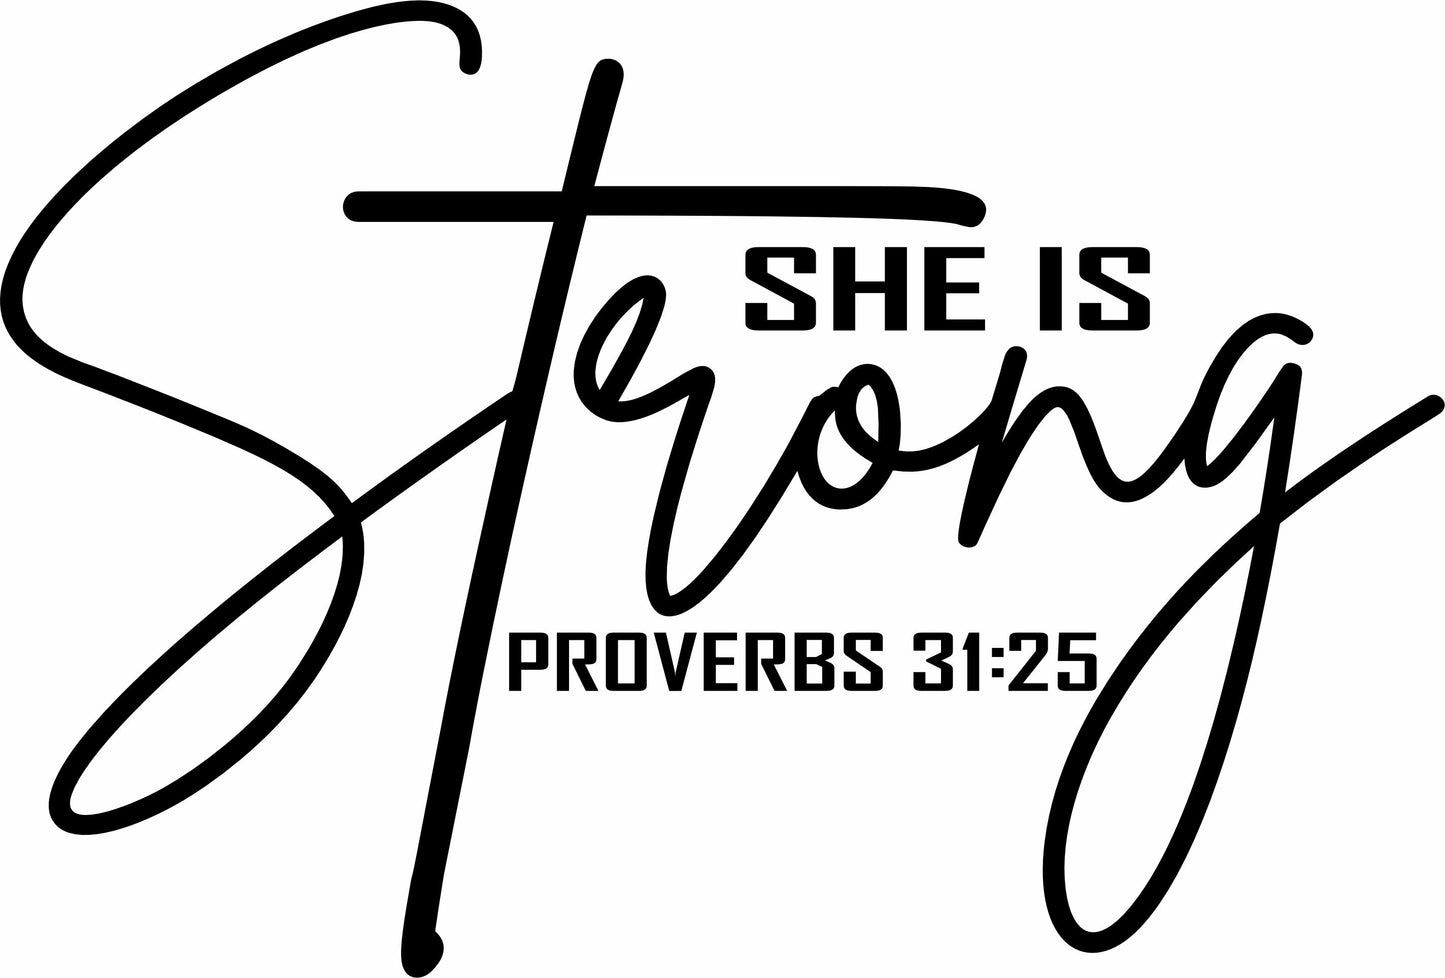 She is Strong Proverbs 31:25 Religious Decal